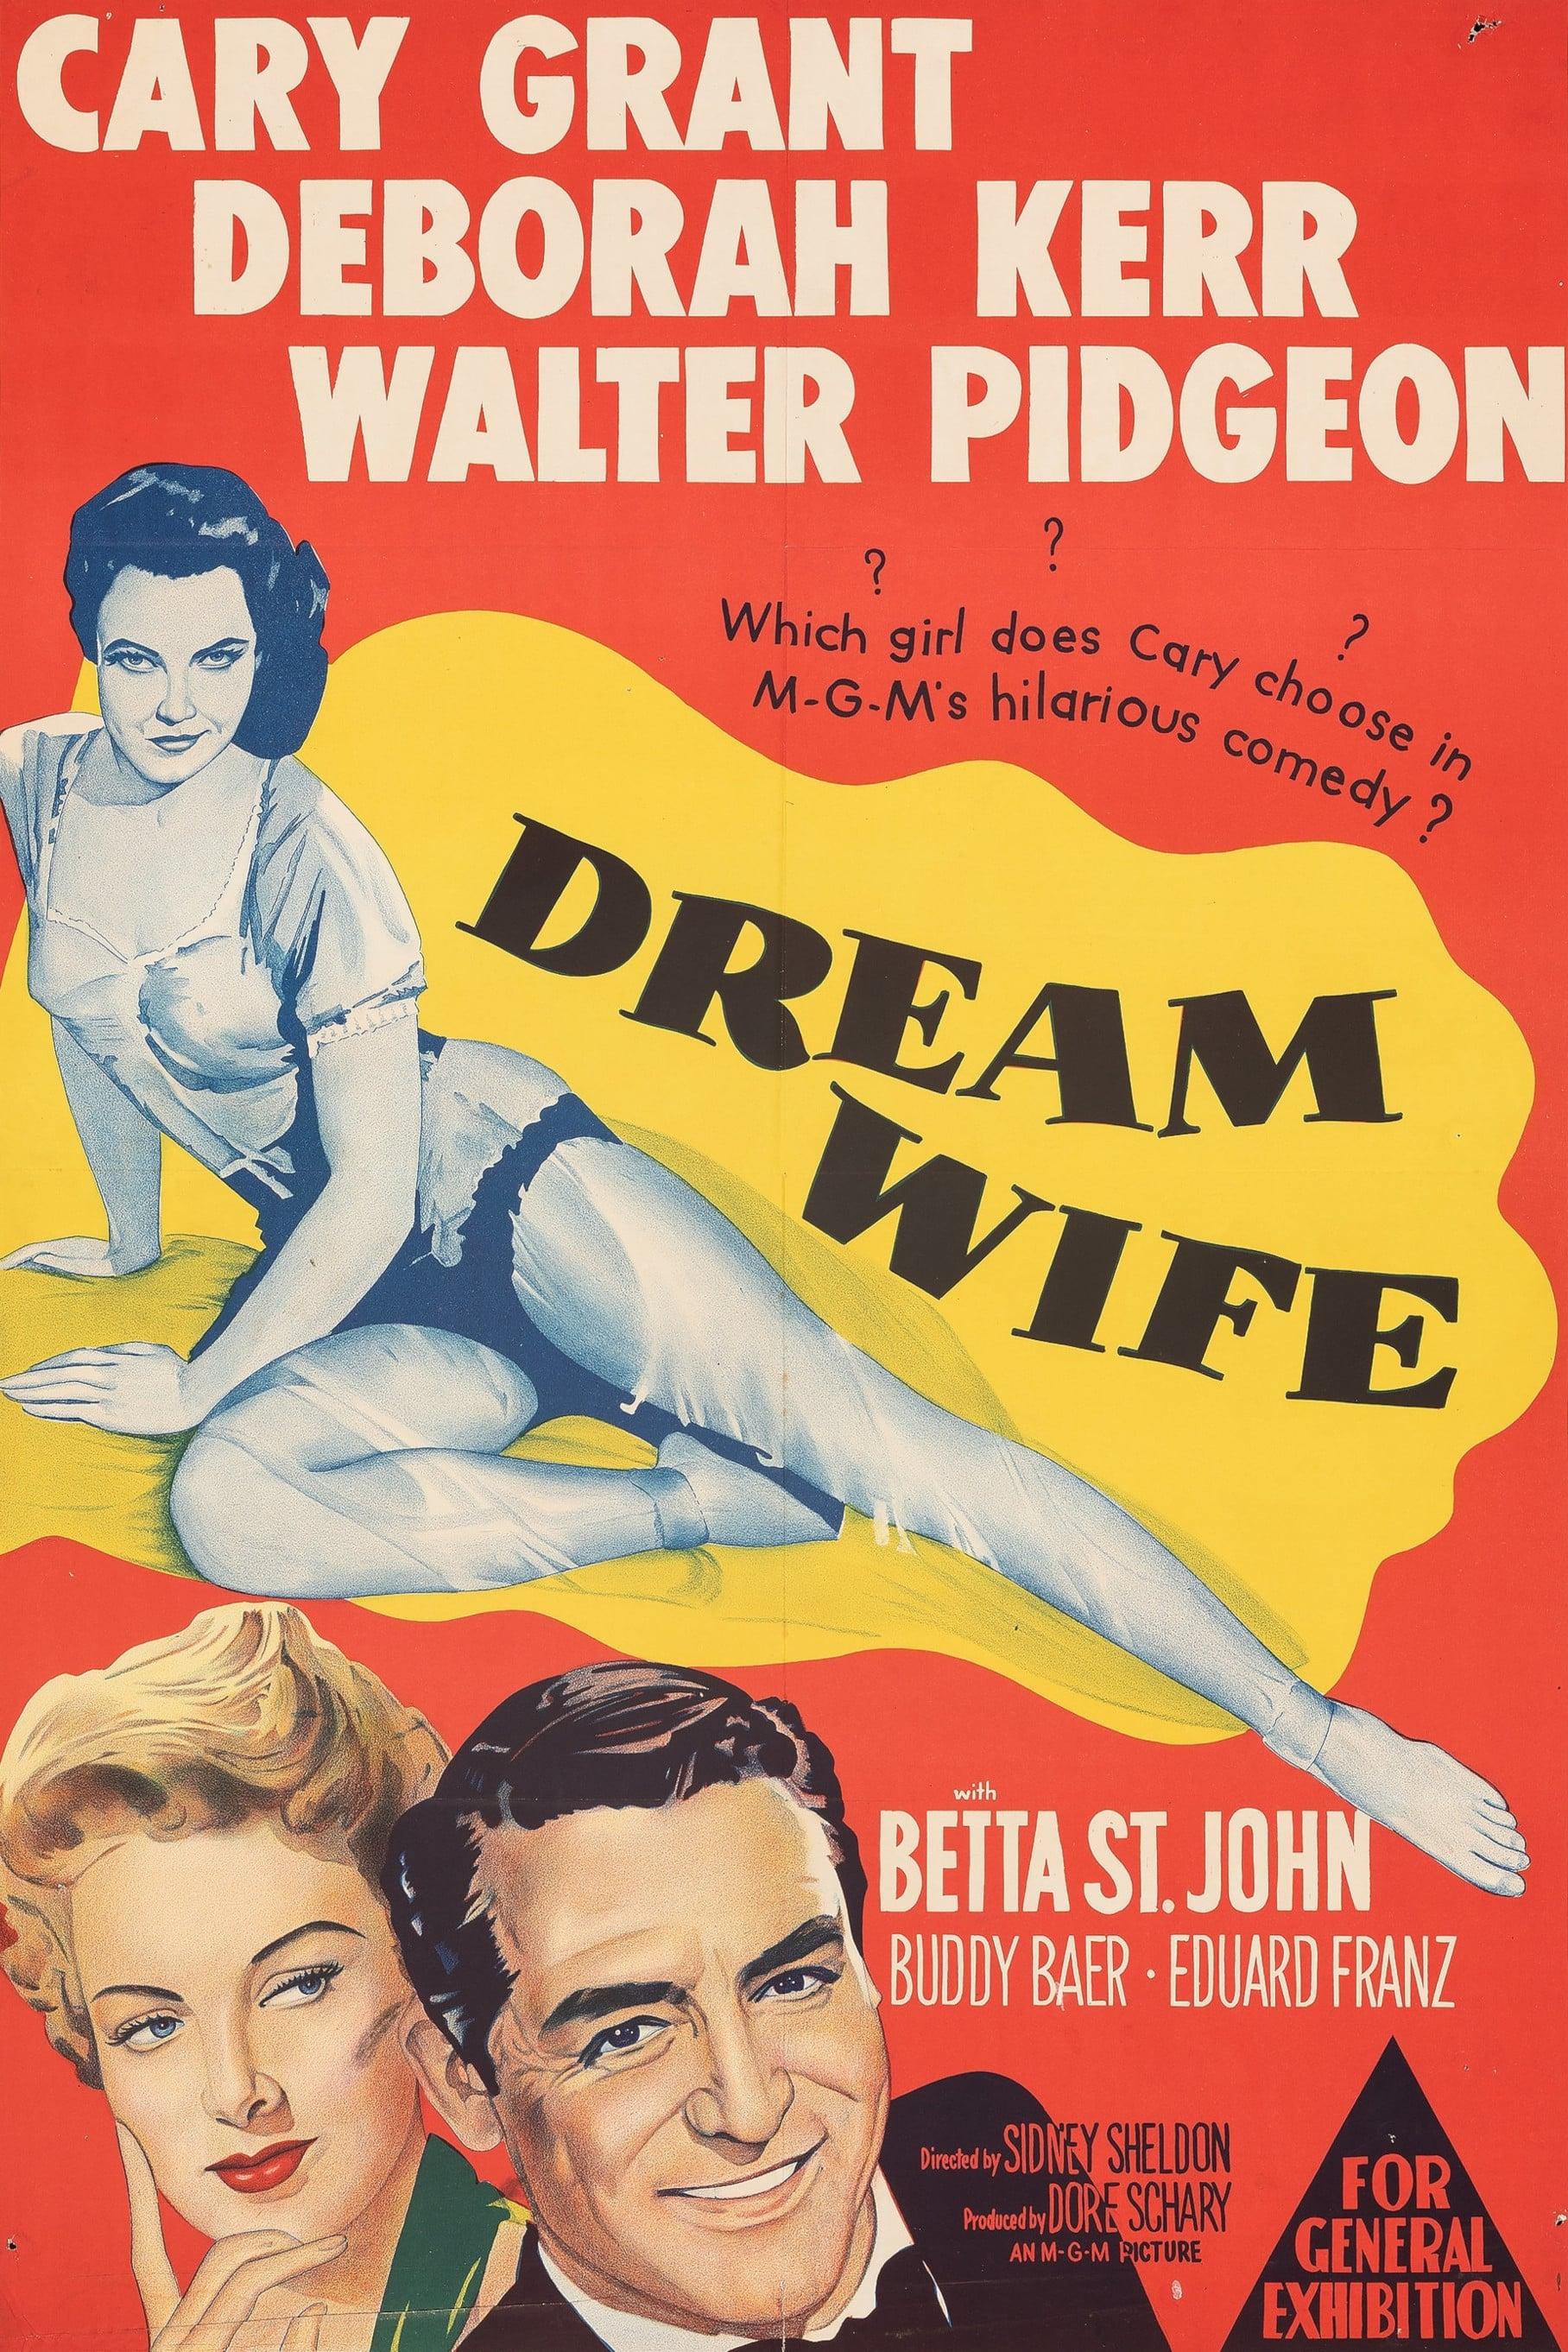 Dream Wife poster